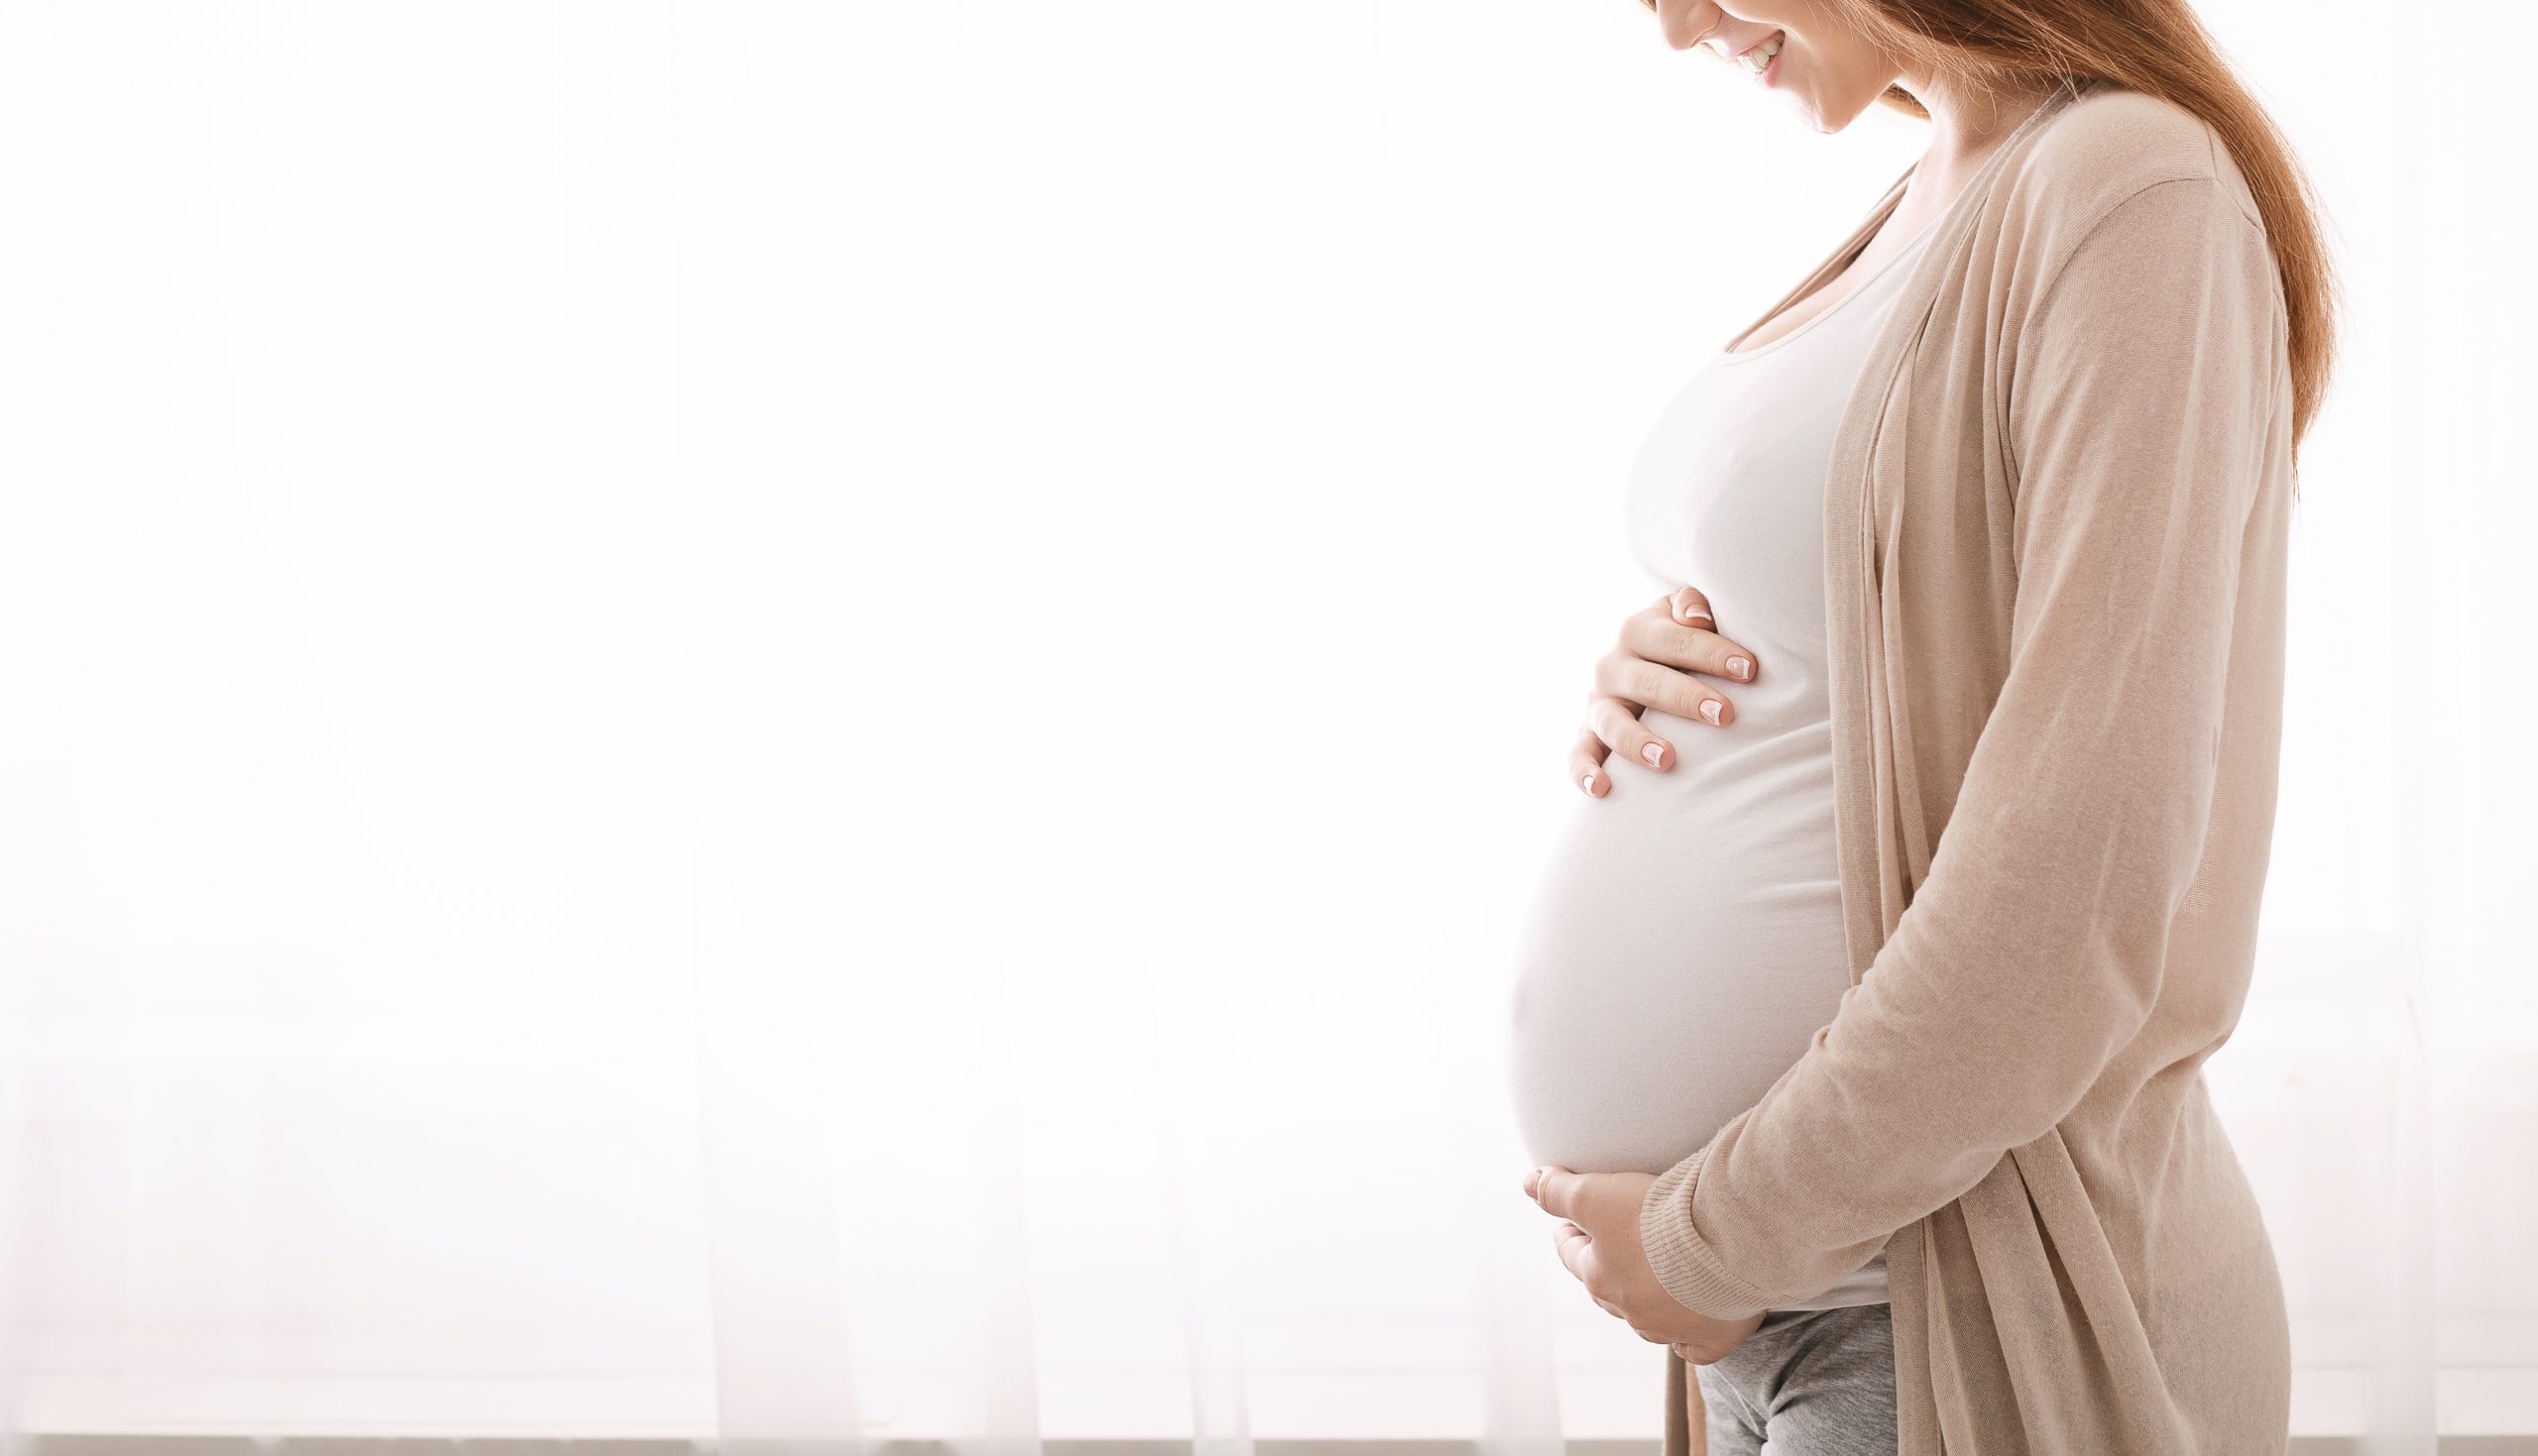 Does pelvic floor physiotherapy help with pregnancy?